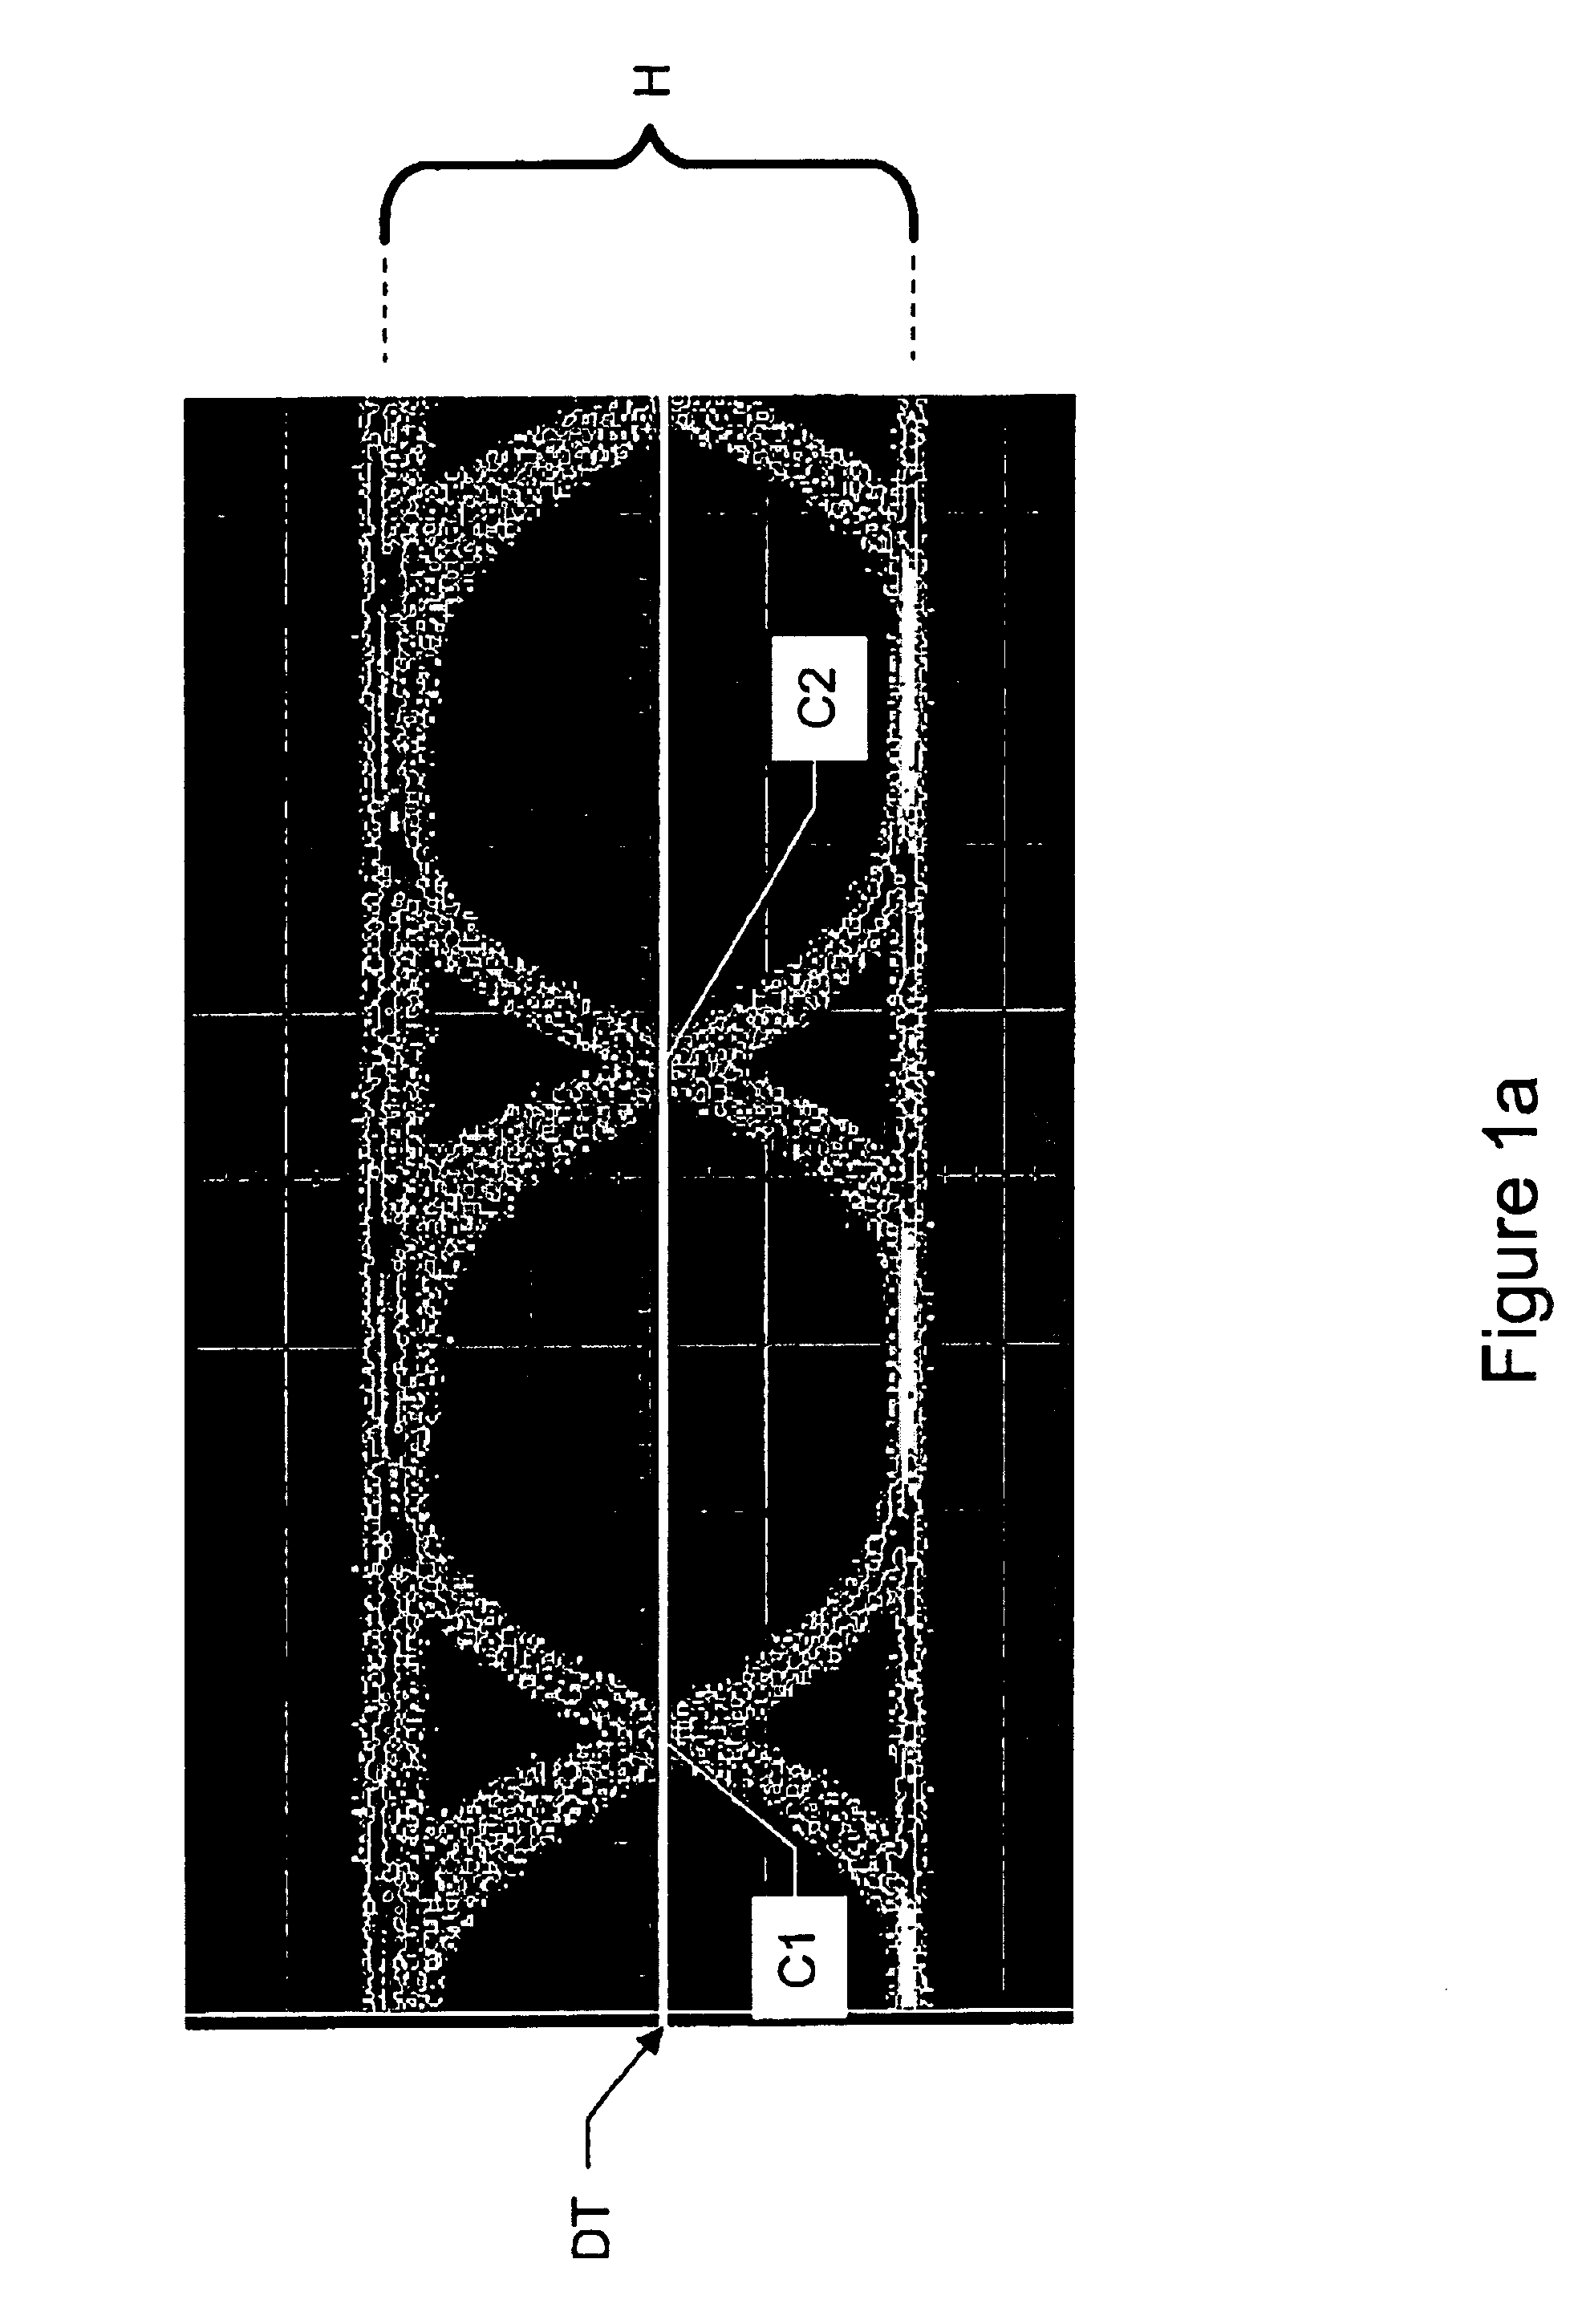 Optical signal receiver and method with decision threshold adjustment based on a total percentage error indicator field of the invention